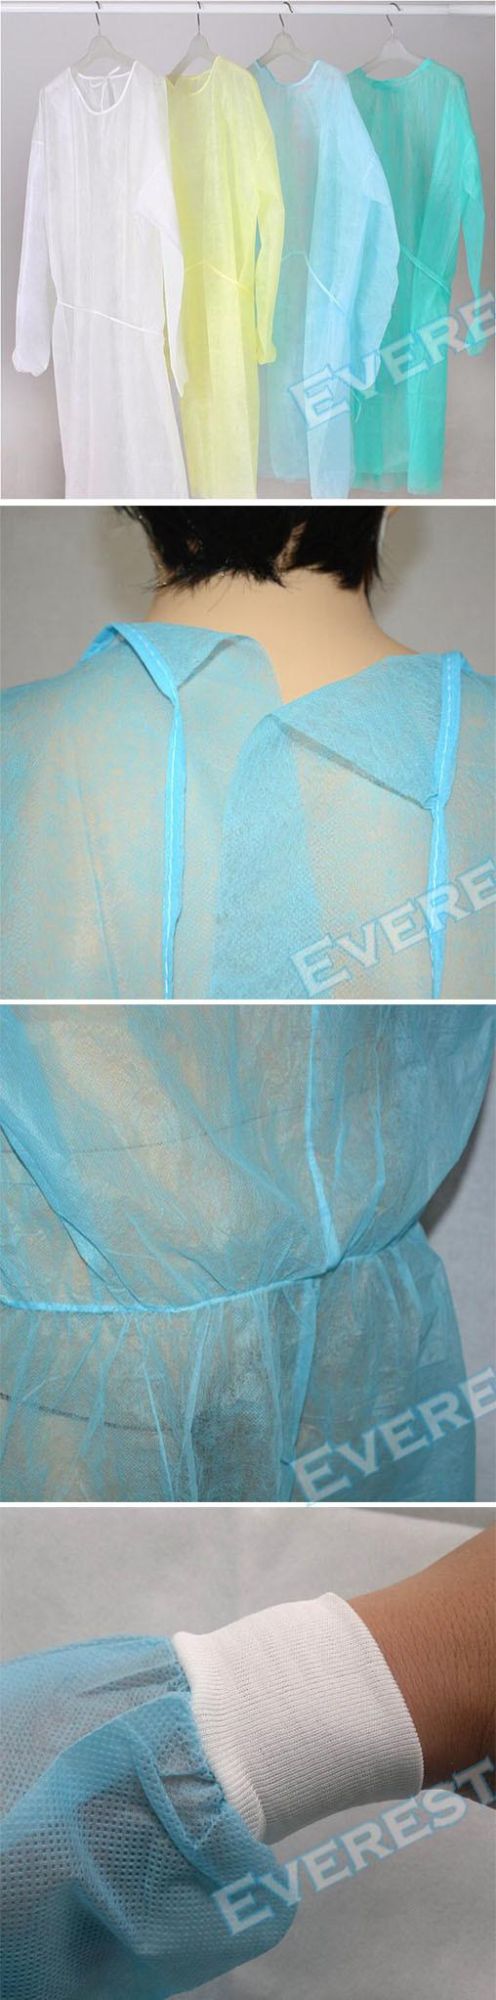 Disposable Nonwoven Elastic Cuff Isolation Gown/Surgical Gown